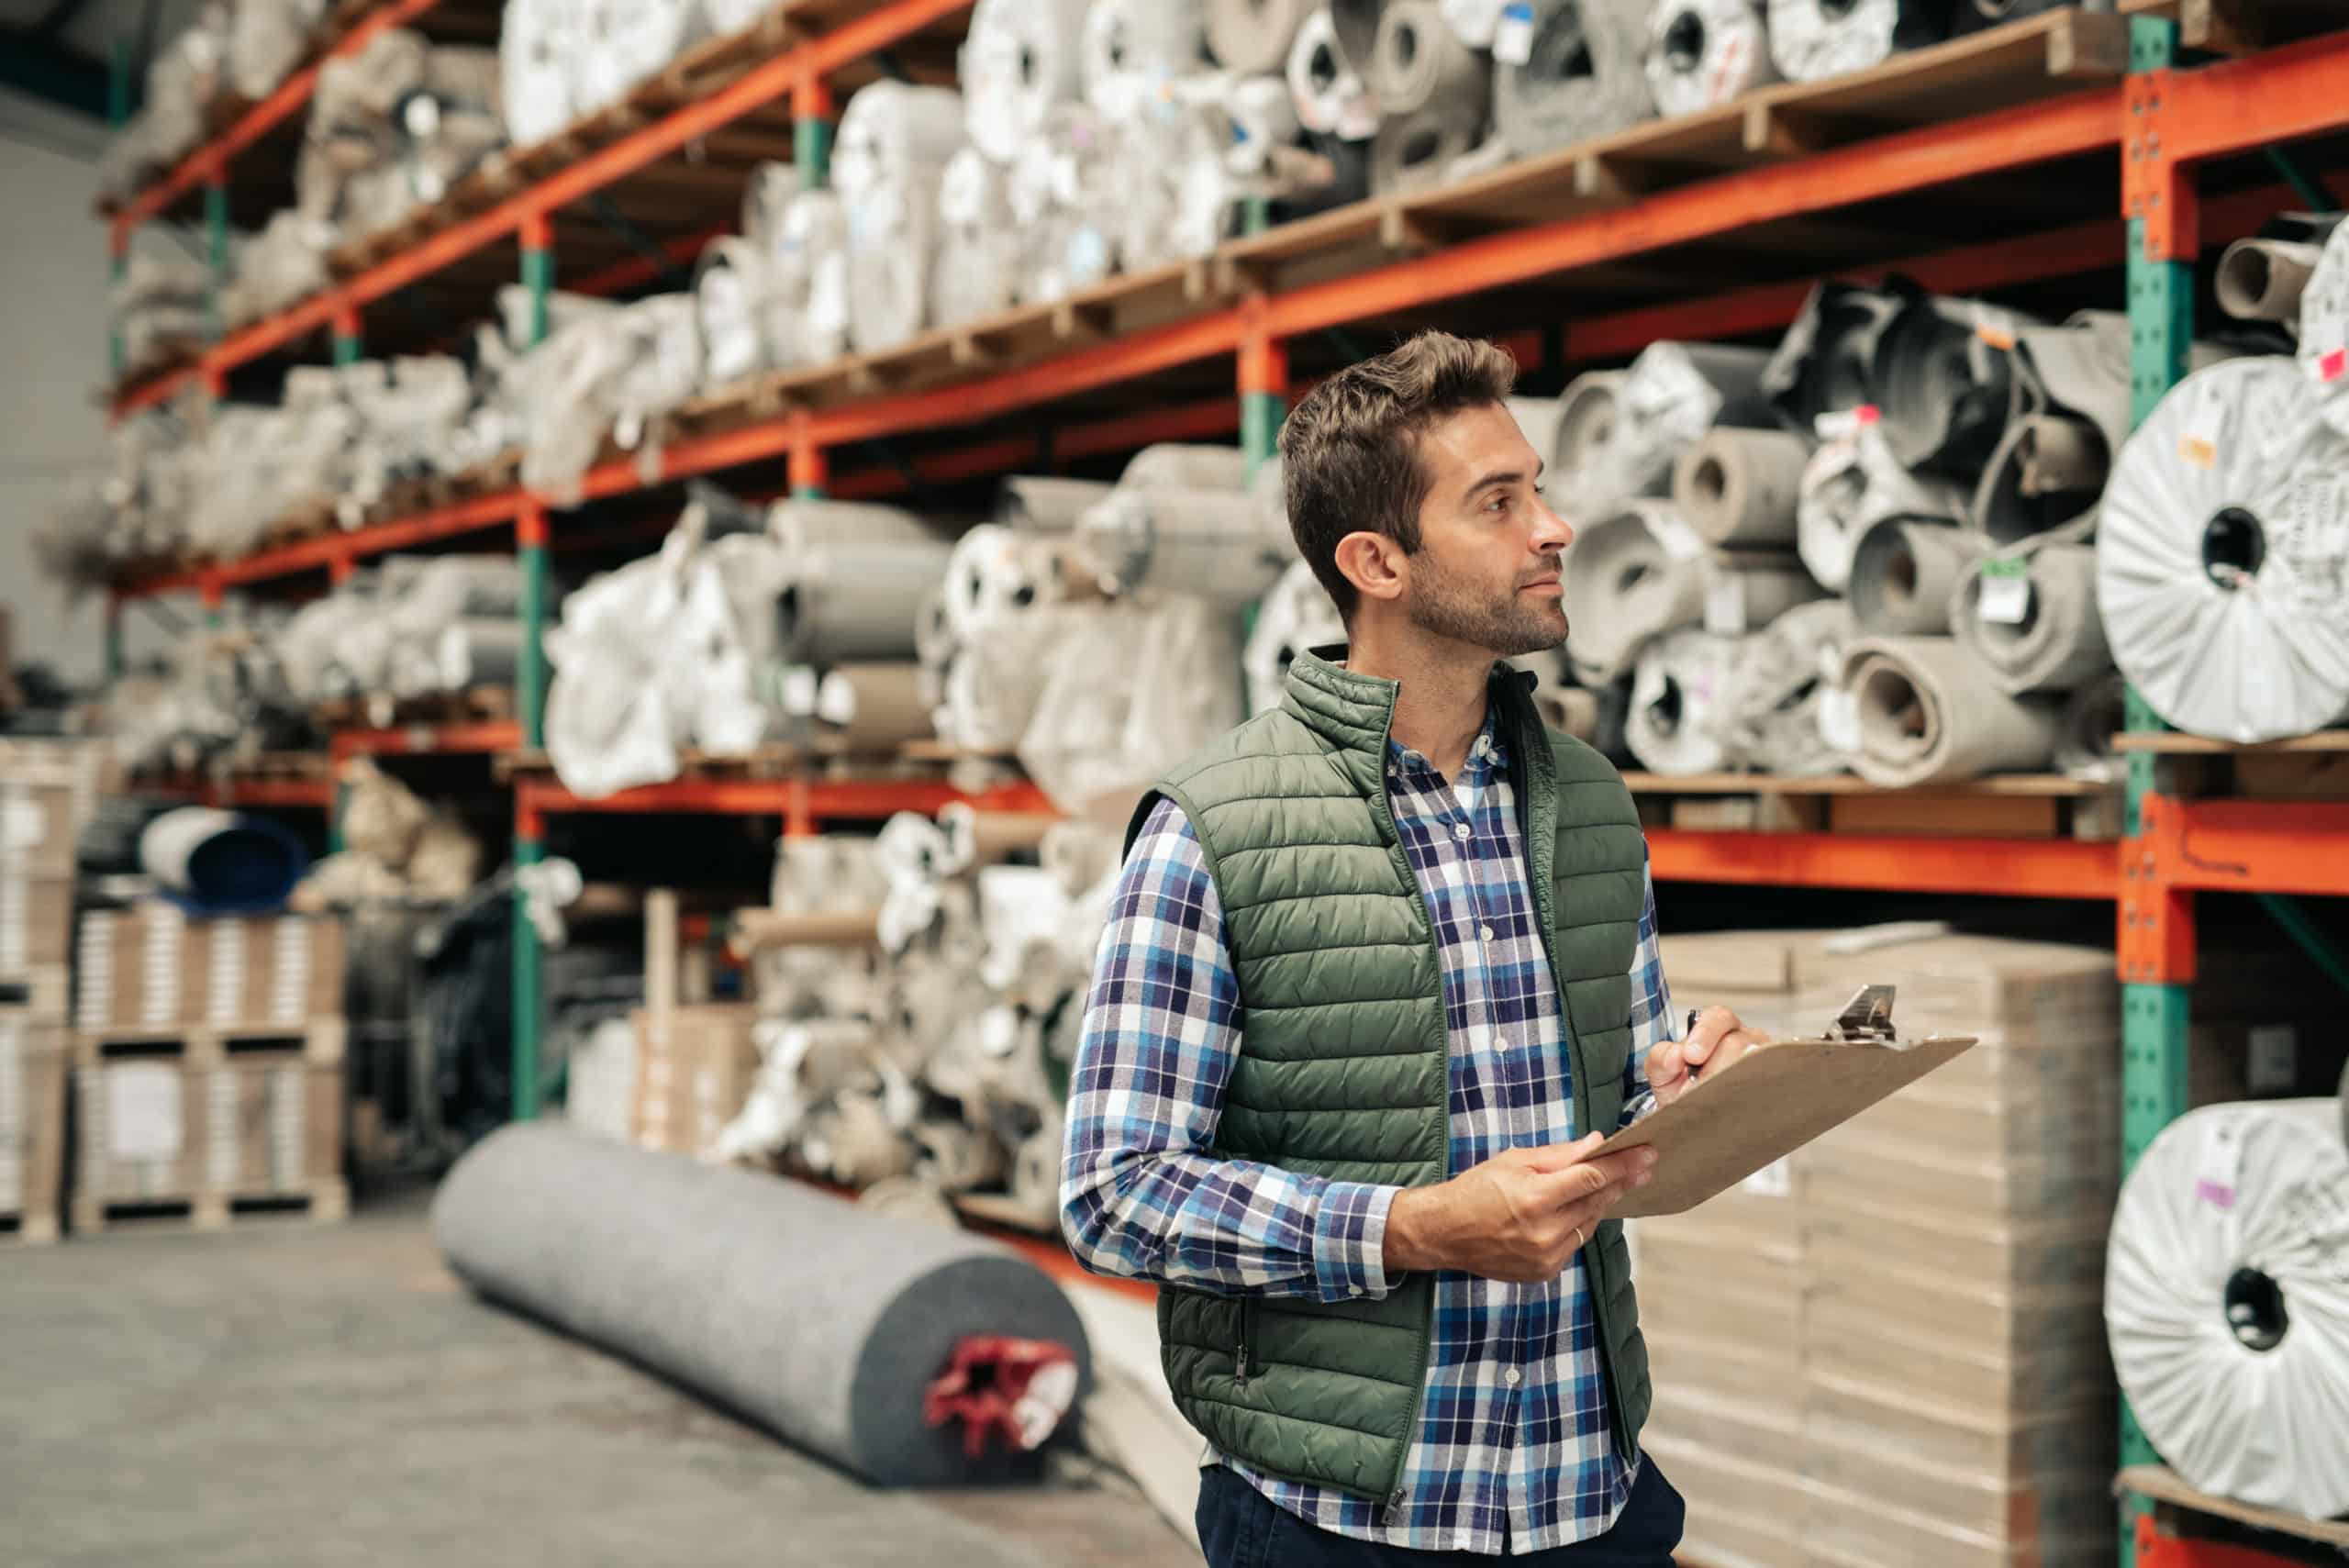 How to Manage Inventory Supply Issues in Your Contractor Business